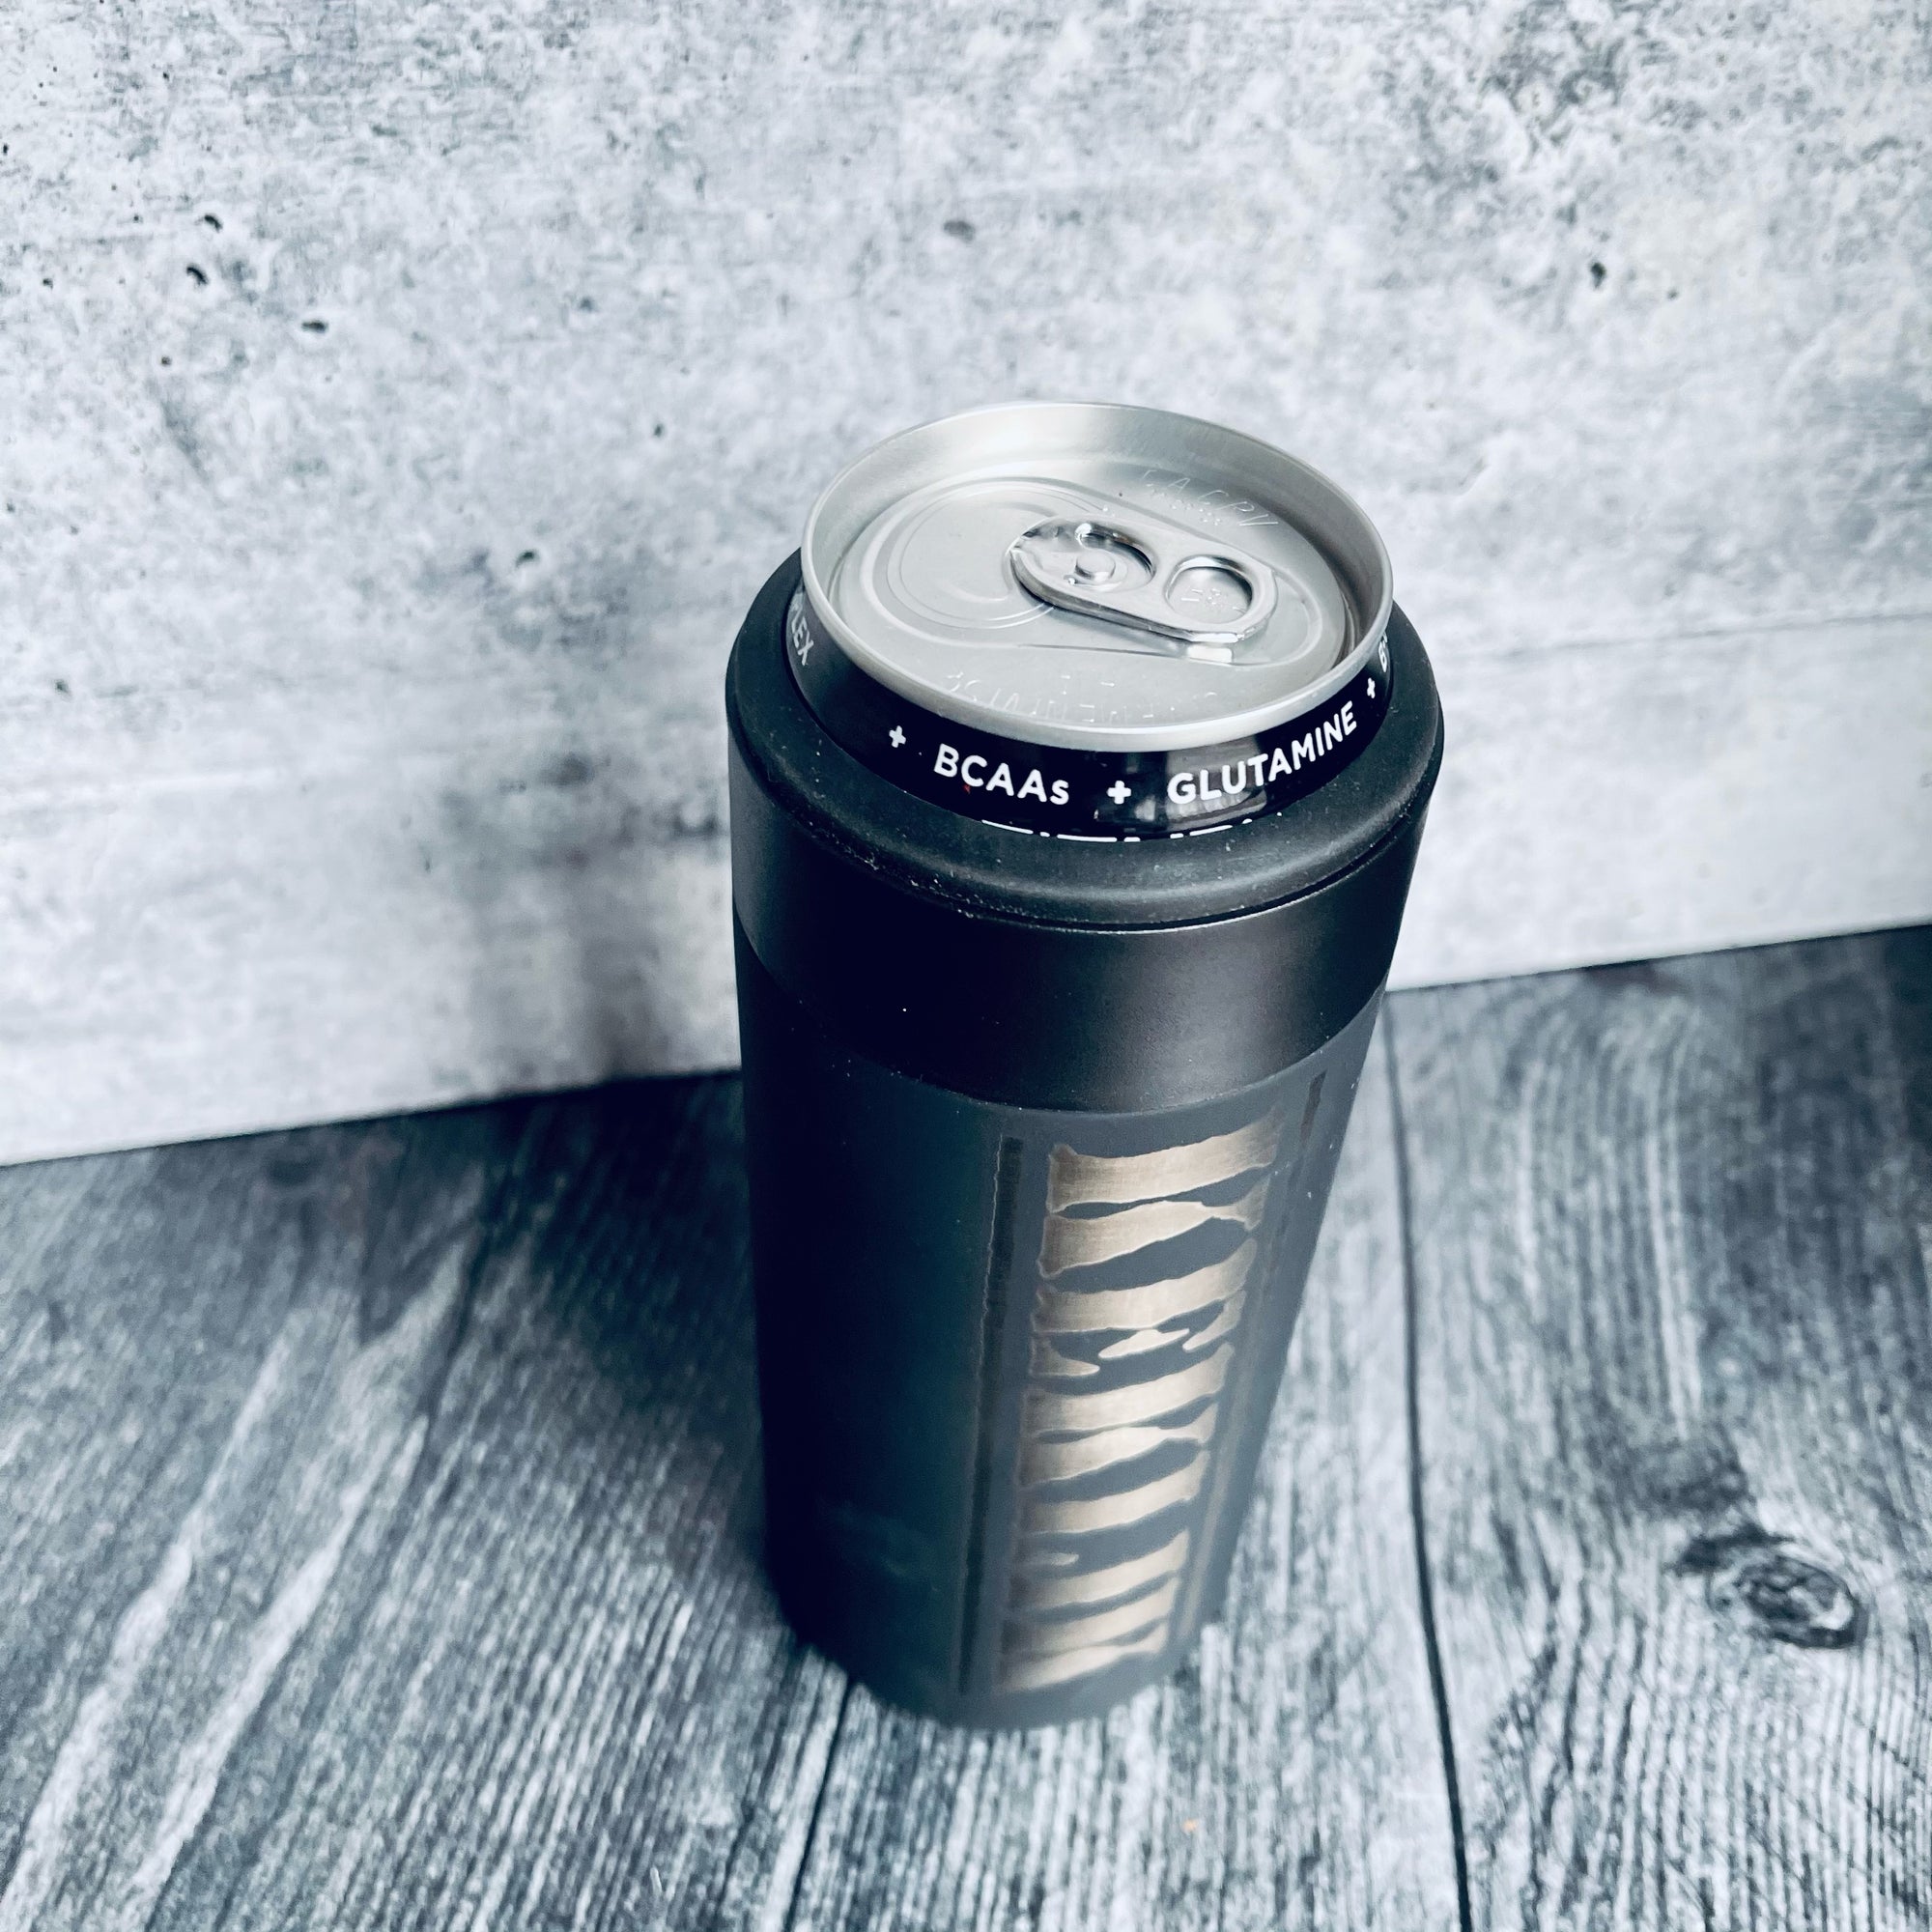 Personalized Slim Can Koozie for Him 